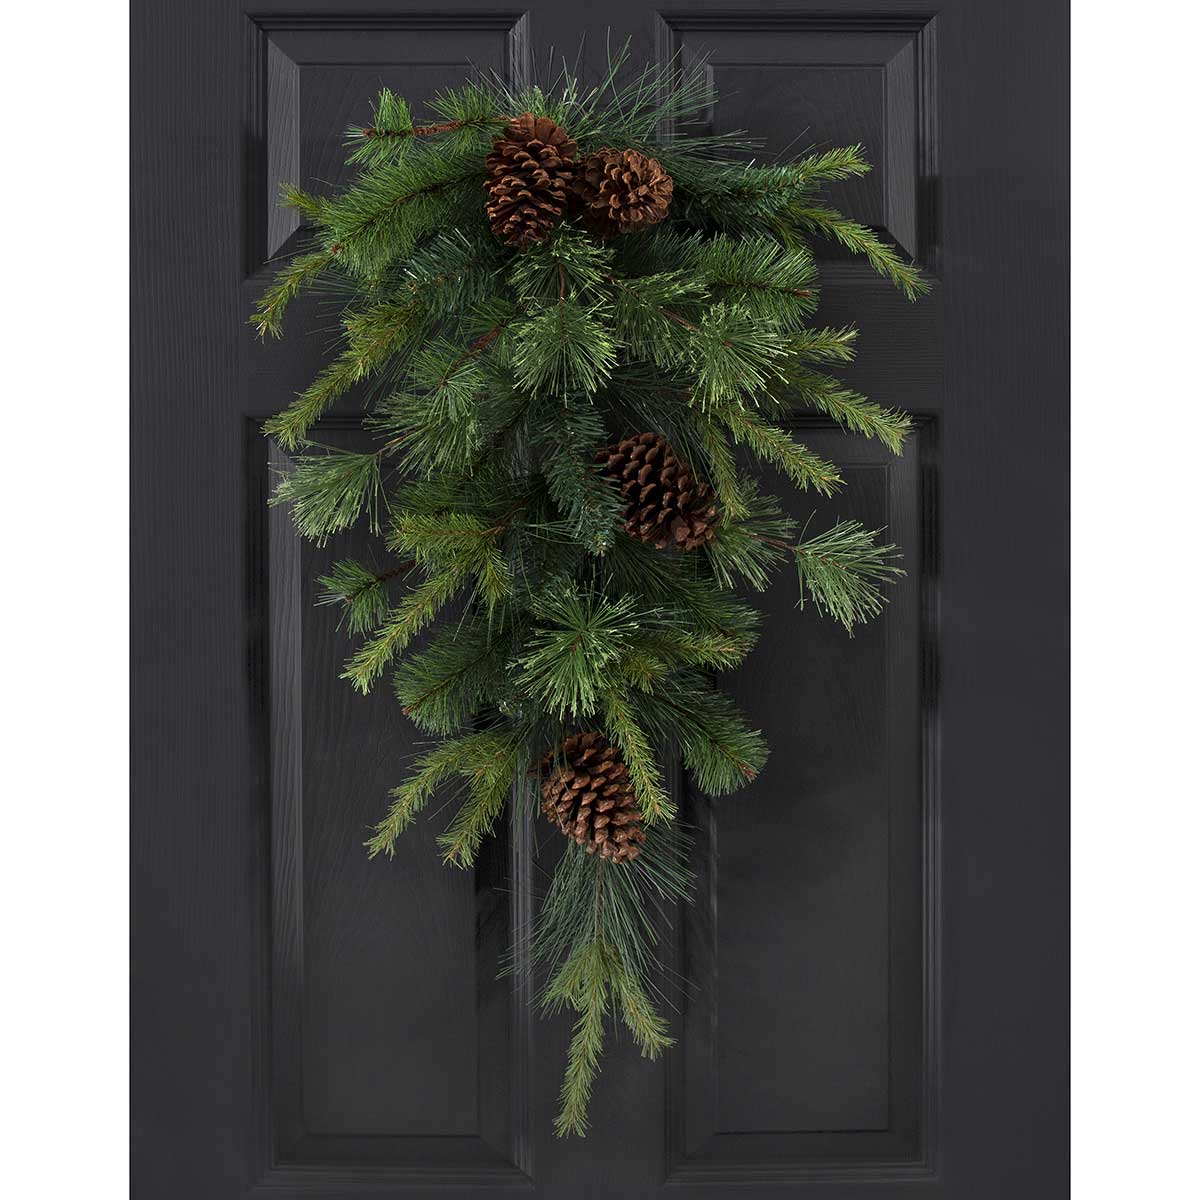 BOUGH AUSTRIAN PINE MIX 20IN X 30IN GREEN PVC/PINECONES - Click Image to Close